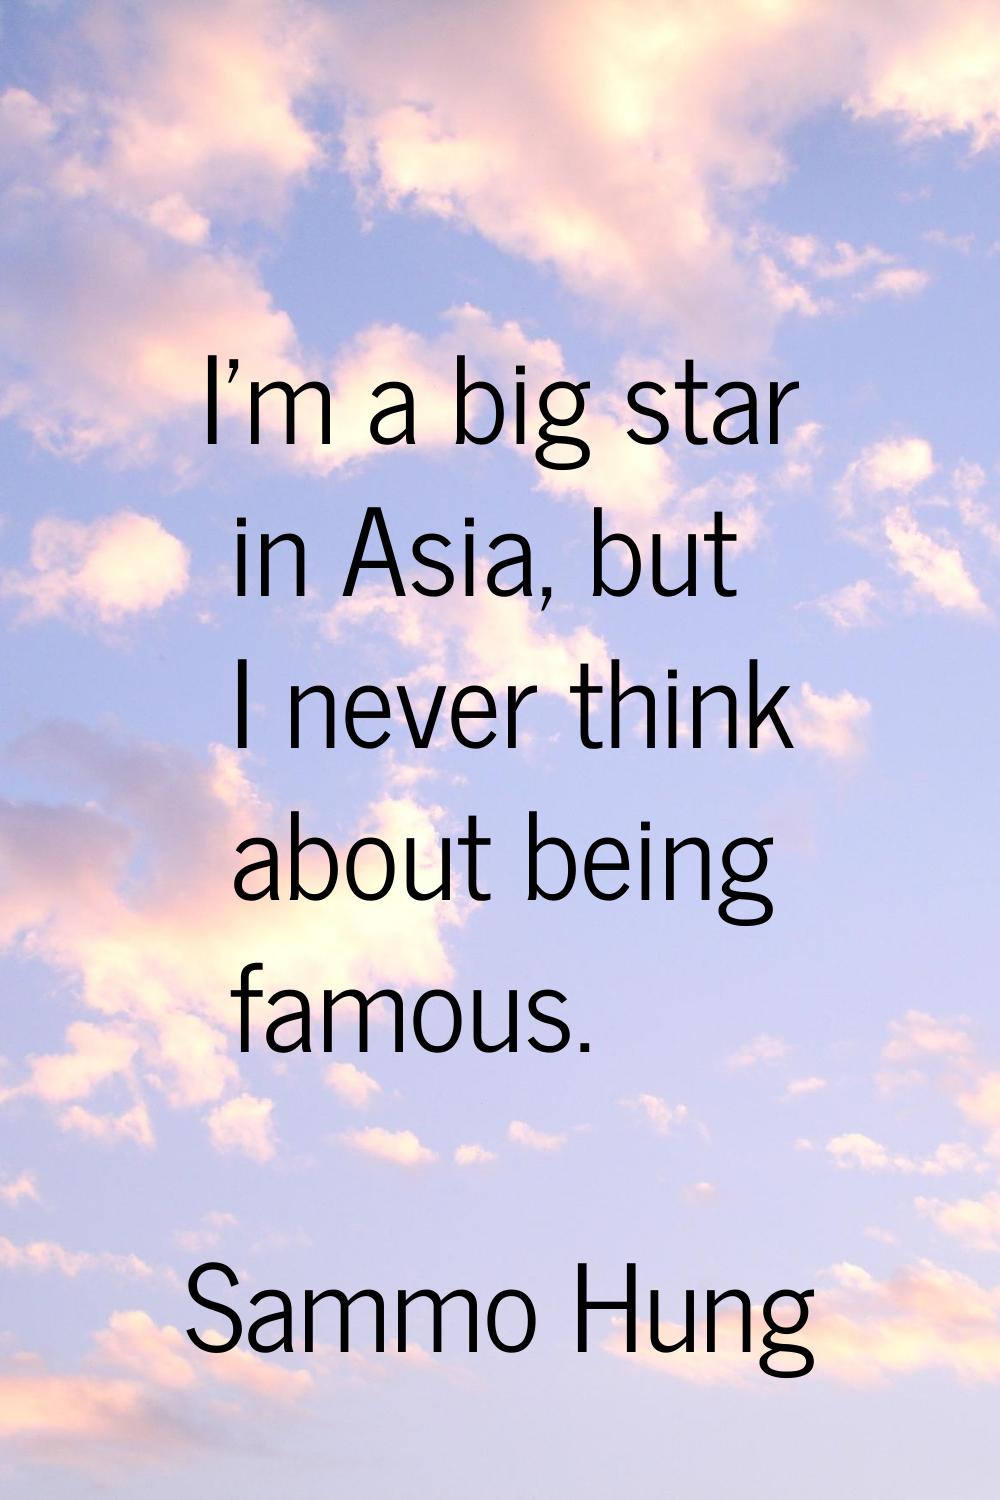 I'm a big star in Asia, but I never think about being famous.